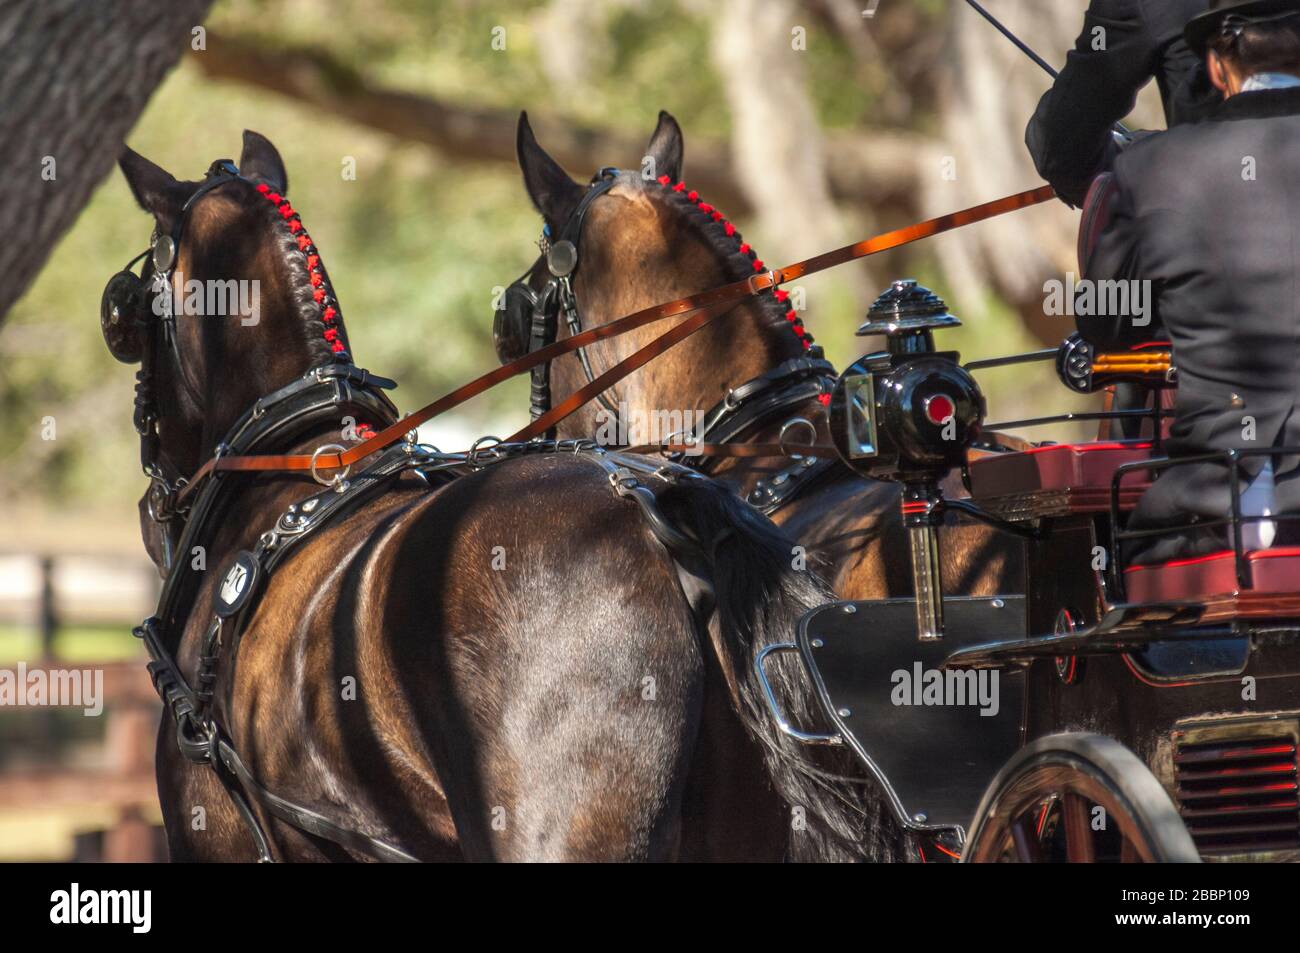 Well turned out team pulling a carriage at combined driving horse event competition Stock Photo